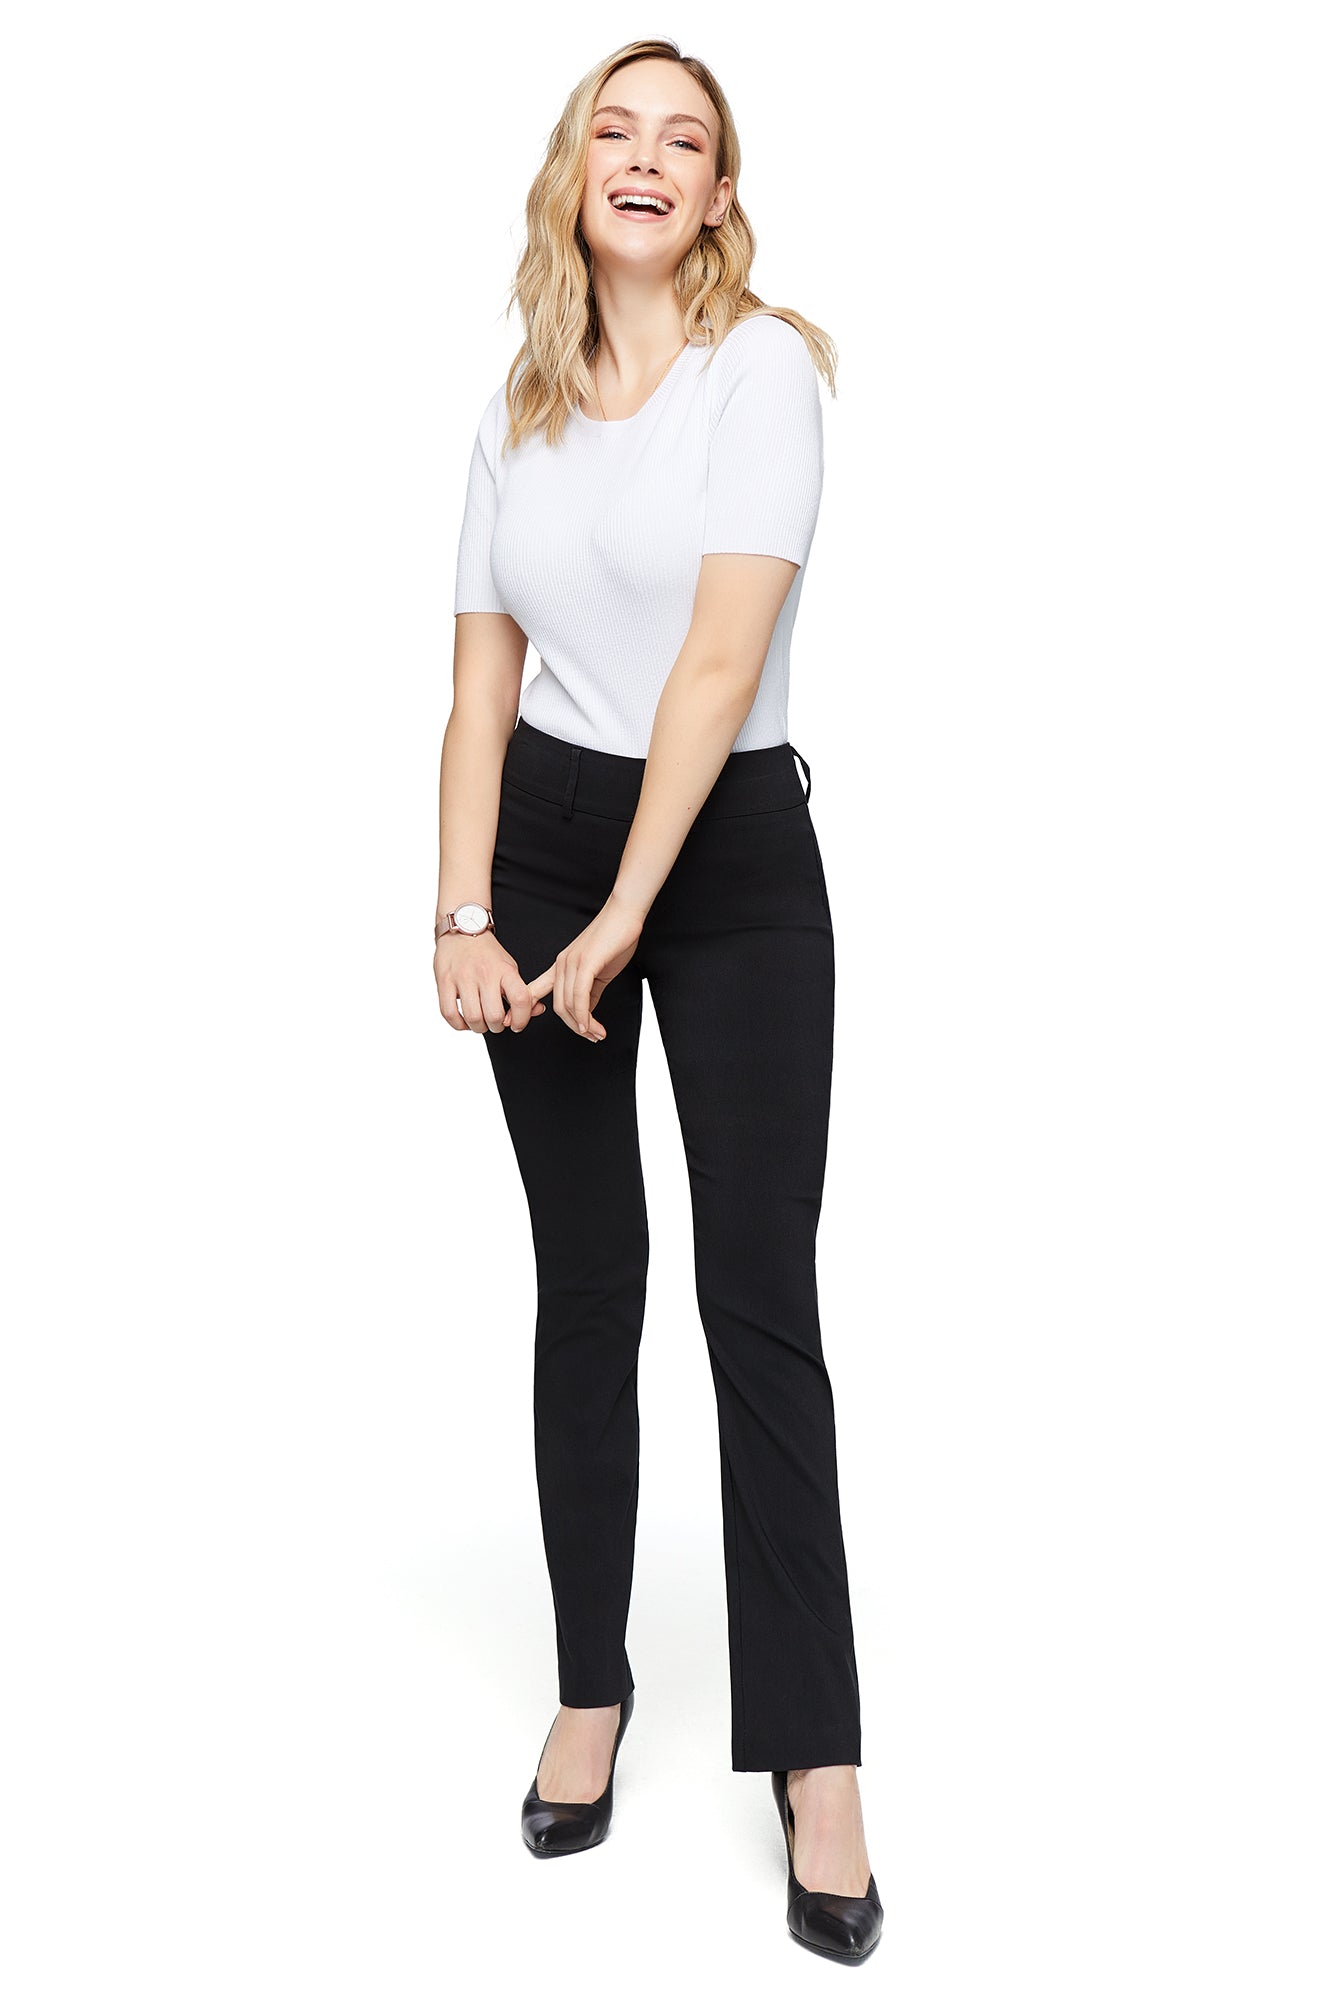 NWT! Margaret M Slimming Pants for Stitch Fix - Black and White - Petite